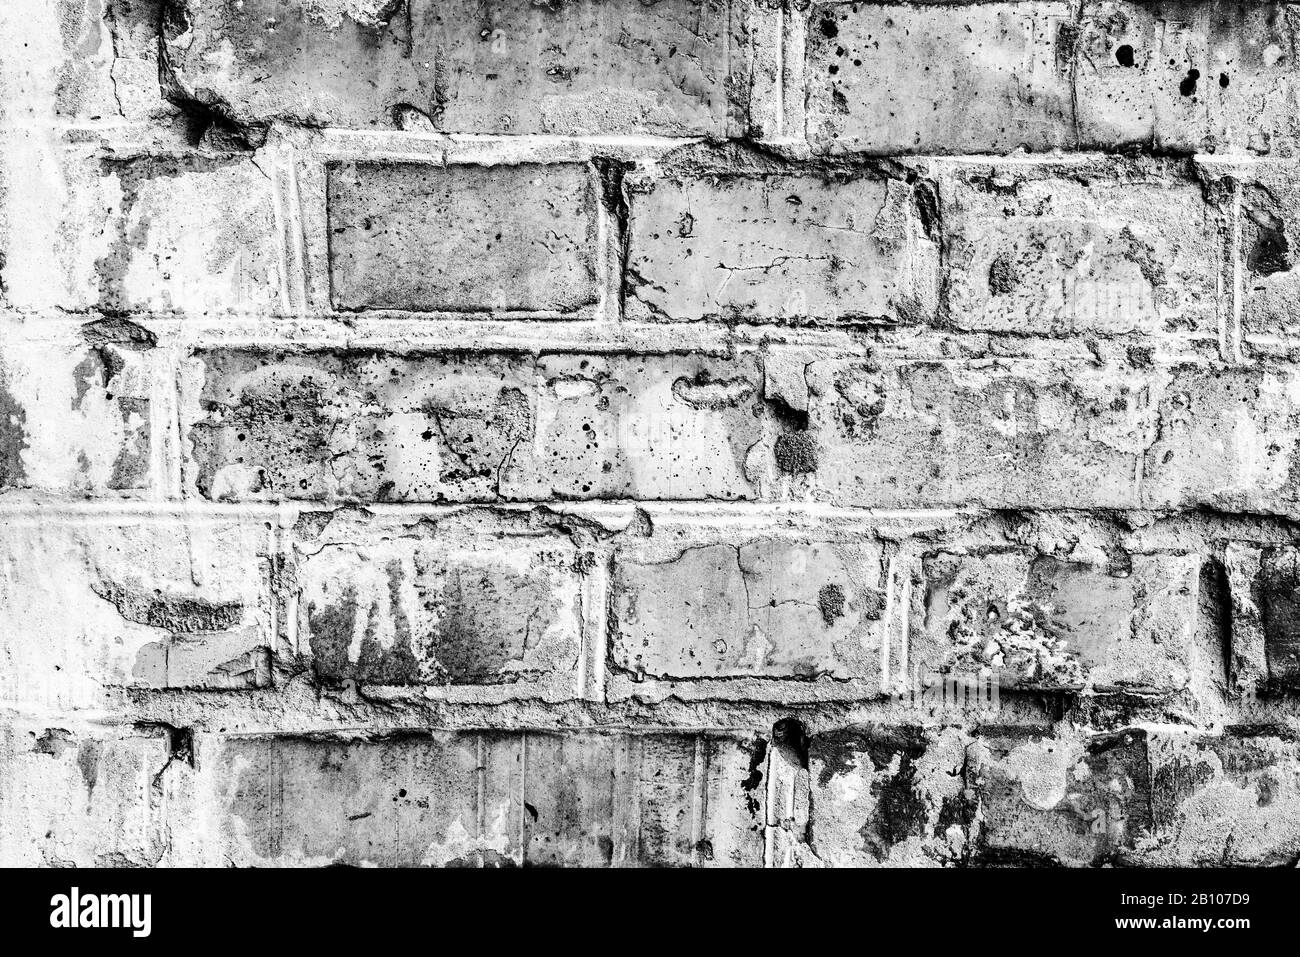 Texture, brick, wall, it can be used as a background. Brick texture with scratches and cracks Stock Photo